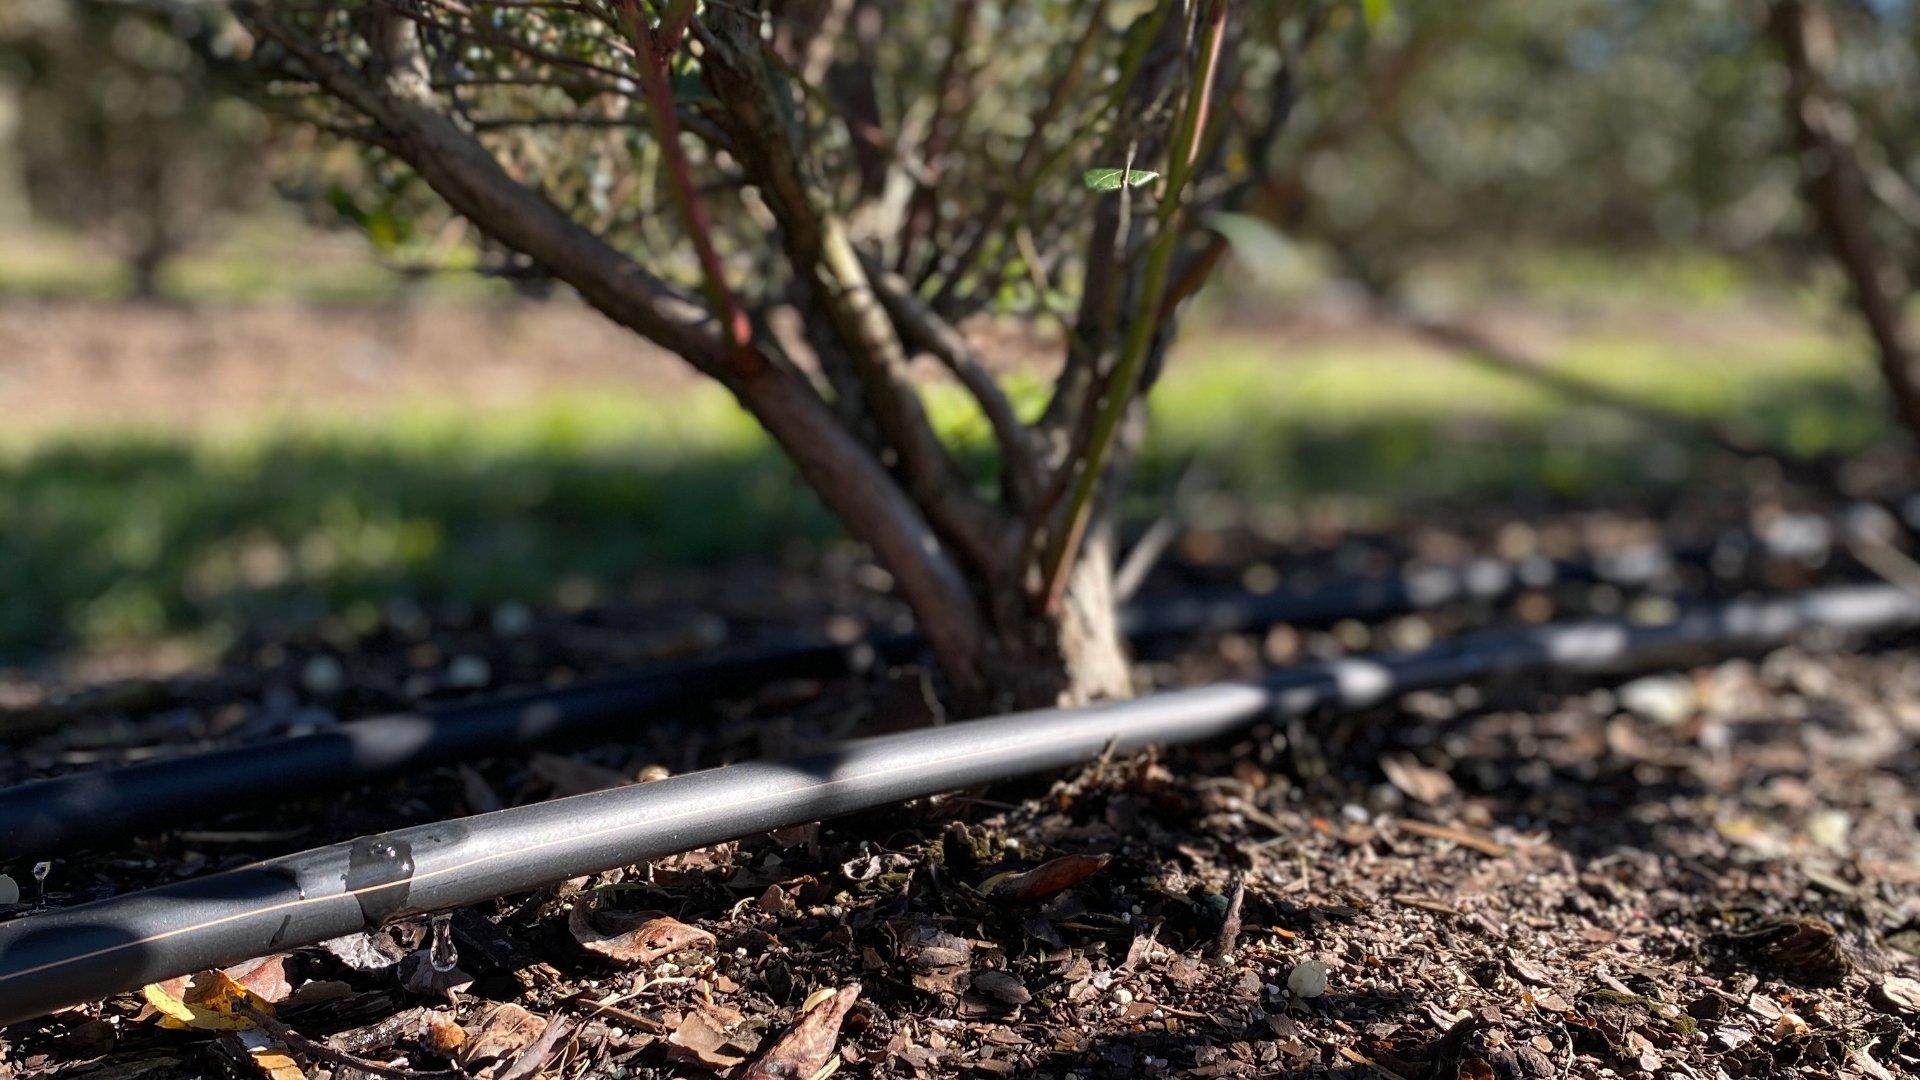 Which Type of Irrigation System Should You Use for Your Crops?